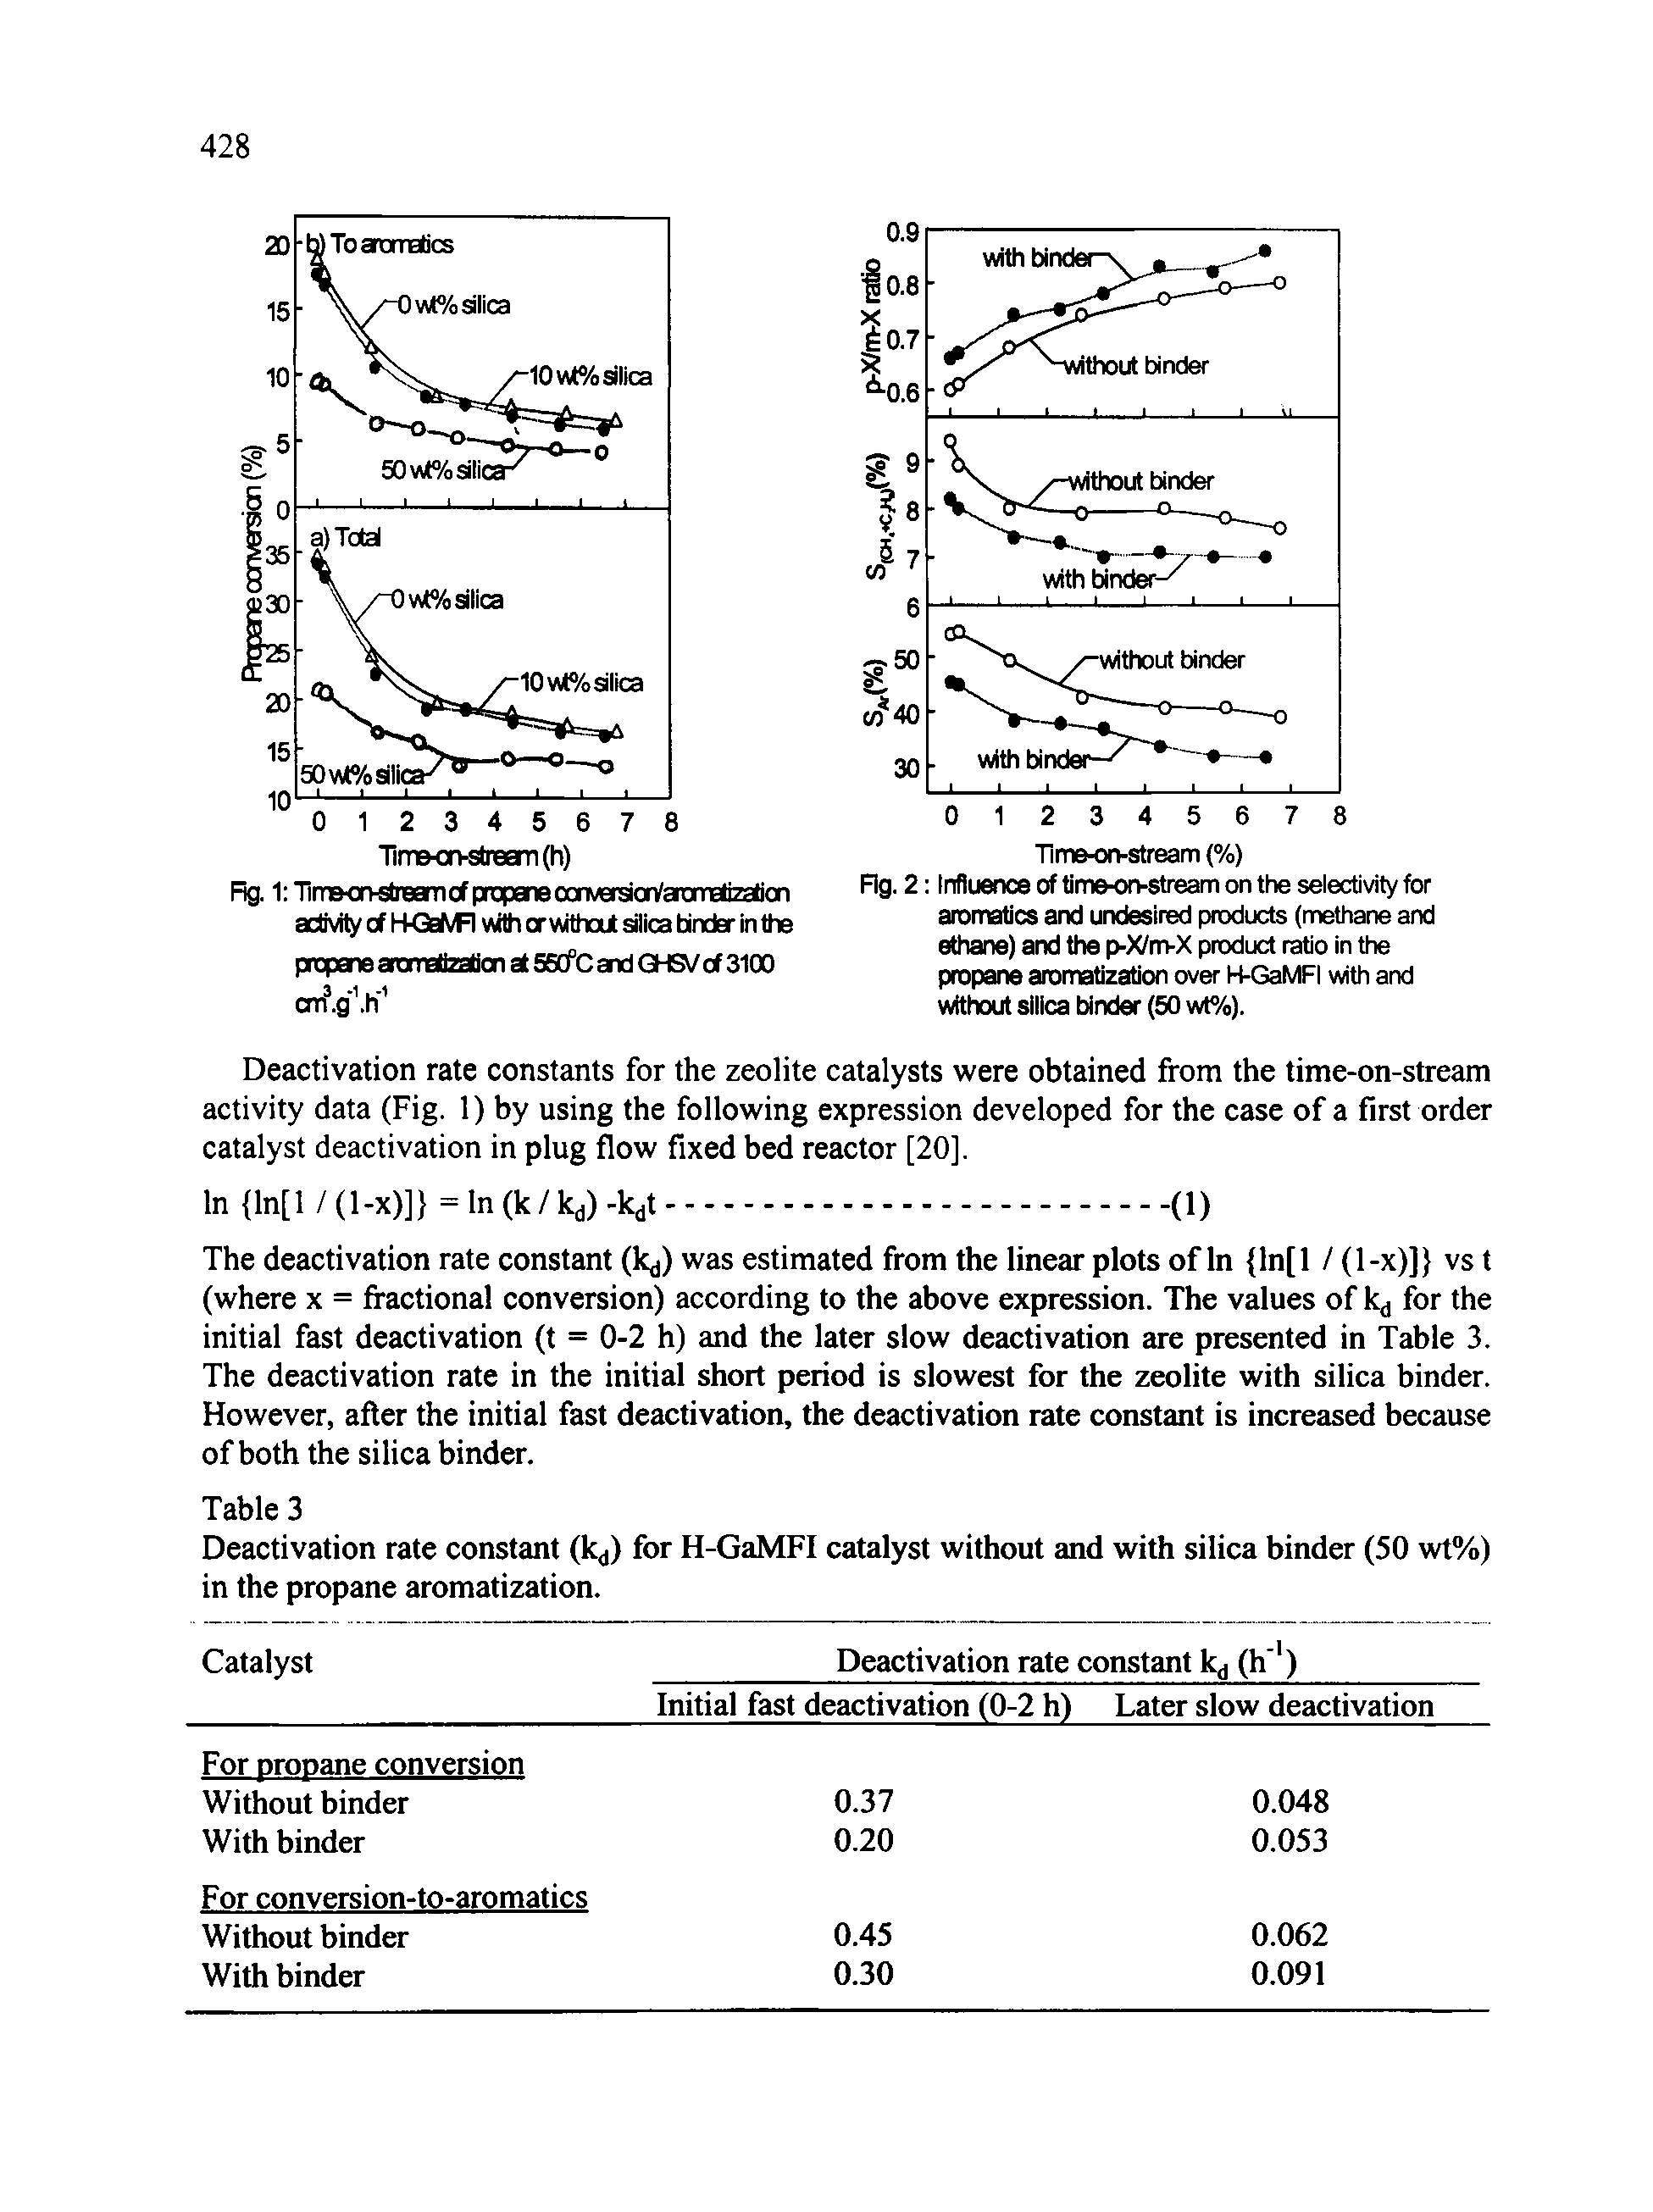 Fig. 2 Influence of time-on-stream on the selectivity for aromatios and undesired products (nnethane and ethane) and the p-X/m-X product ratio in the propane aromatization over H-GaMFI with and without silica binder (SO wt%).